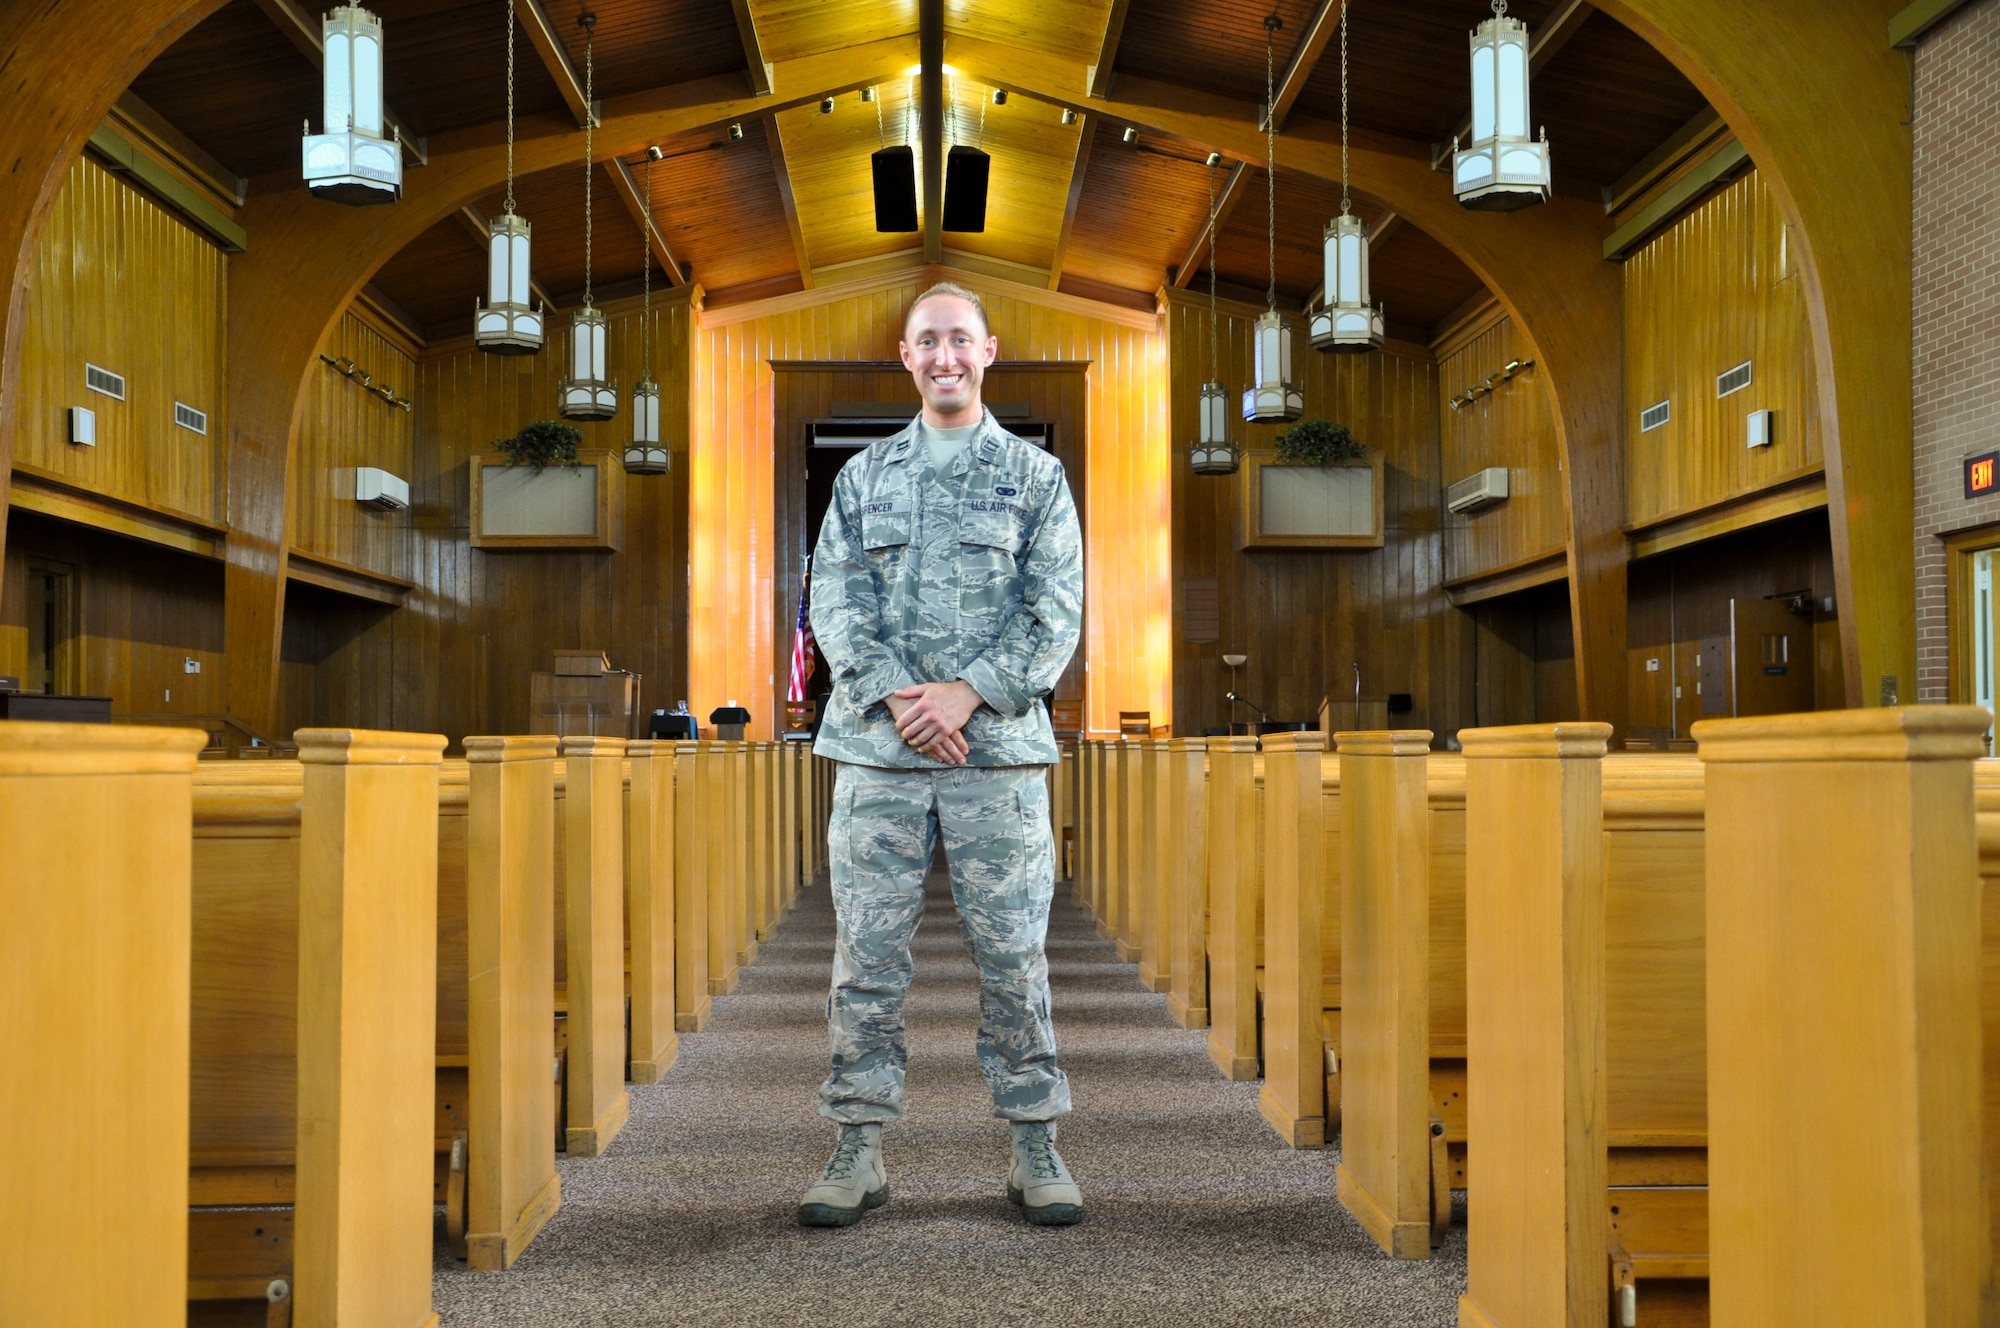 Captain Matthew Spencer, 325th Fighter Wing chaplain, stands between the pews in Chapel 2 at Tyndall Air Force Base July 3. Spencer was a prior enlisted member of security forces before he commissioned as an officer and became a chaplain in the Air Force Reserves. (U.S. Air Force photo by 2nd Lt. Christopher Bowyer-Meeder)